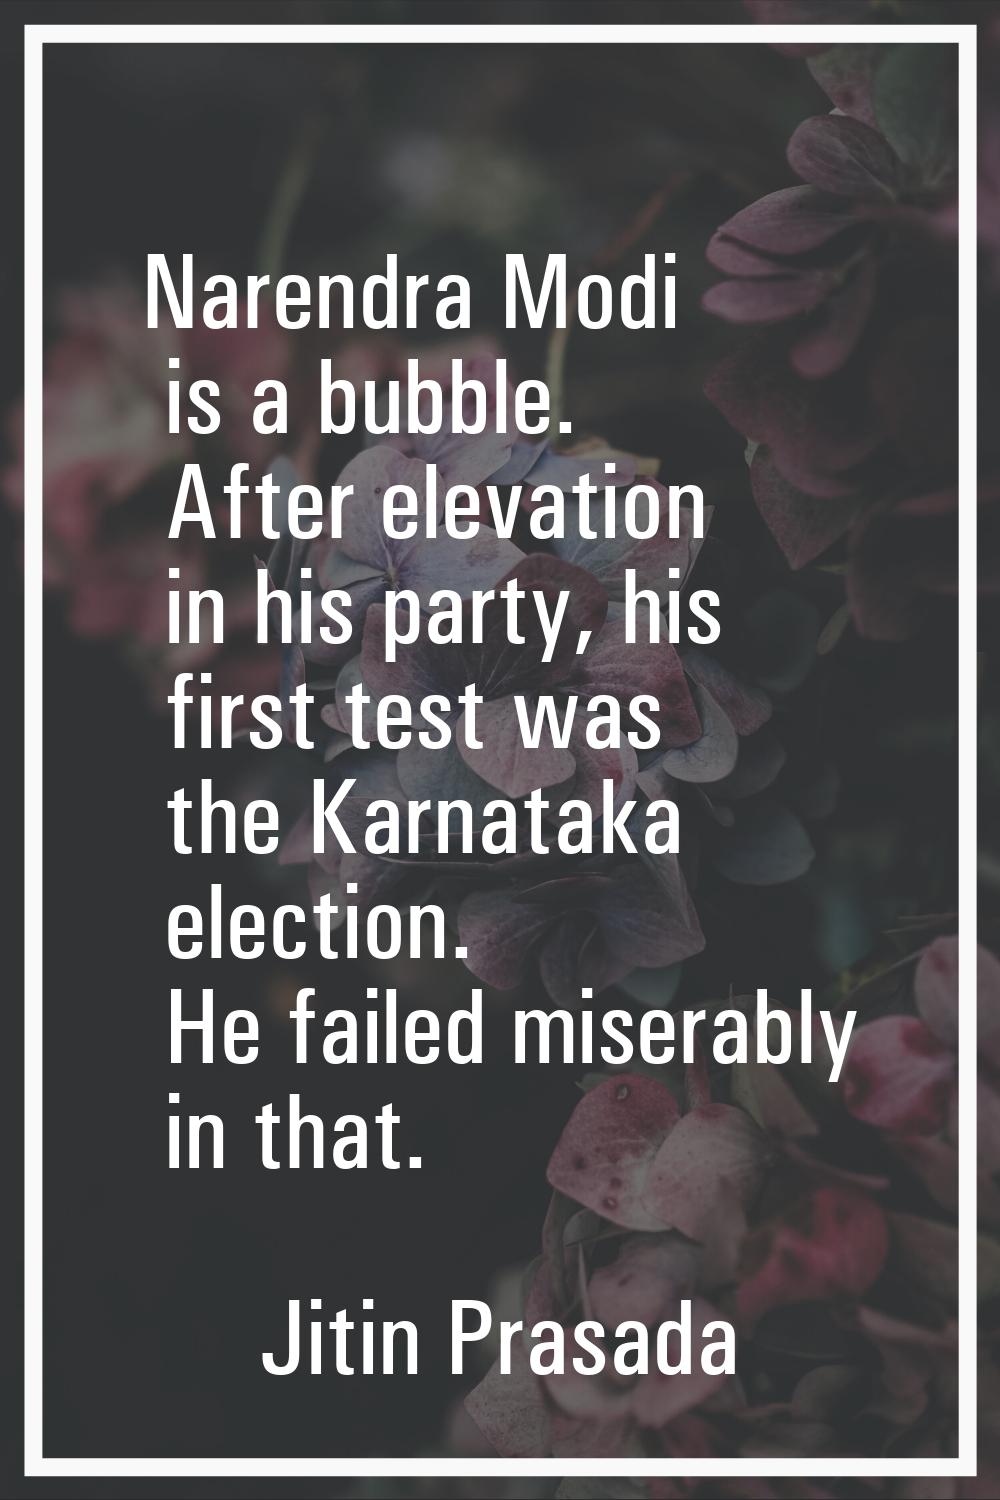 Narendra Modi is a bubble. After elevation in his party, his first test was the Karnataka election.